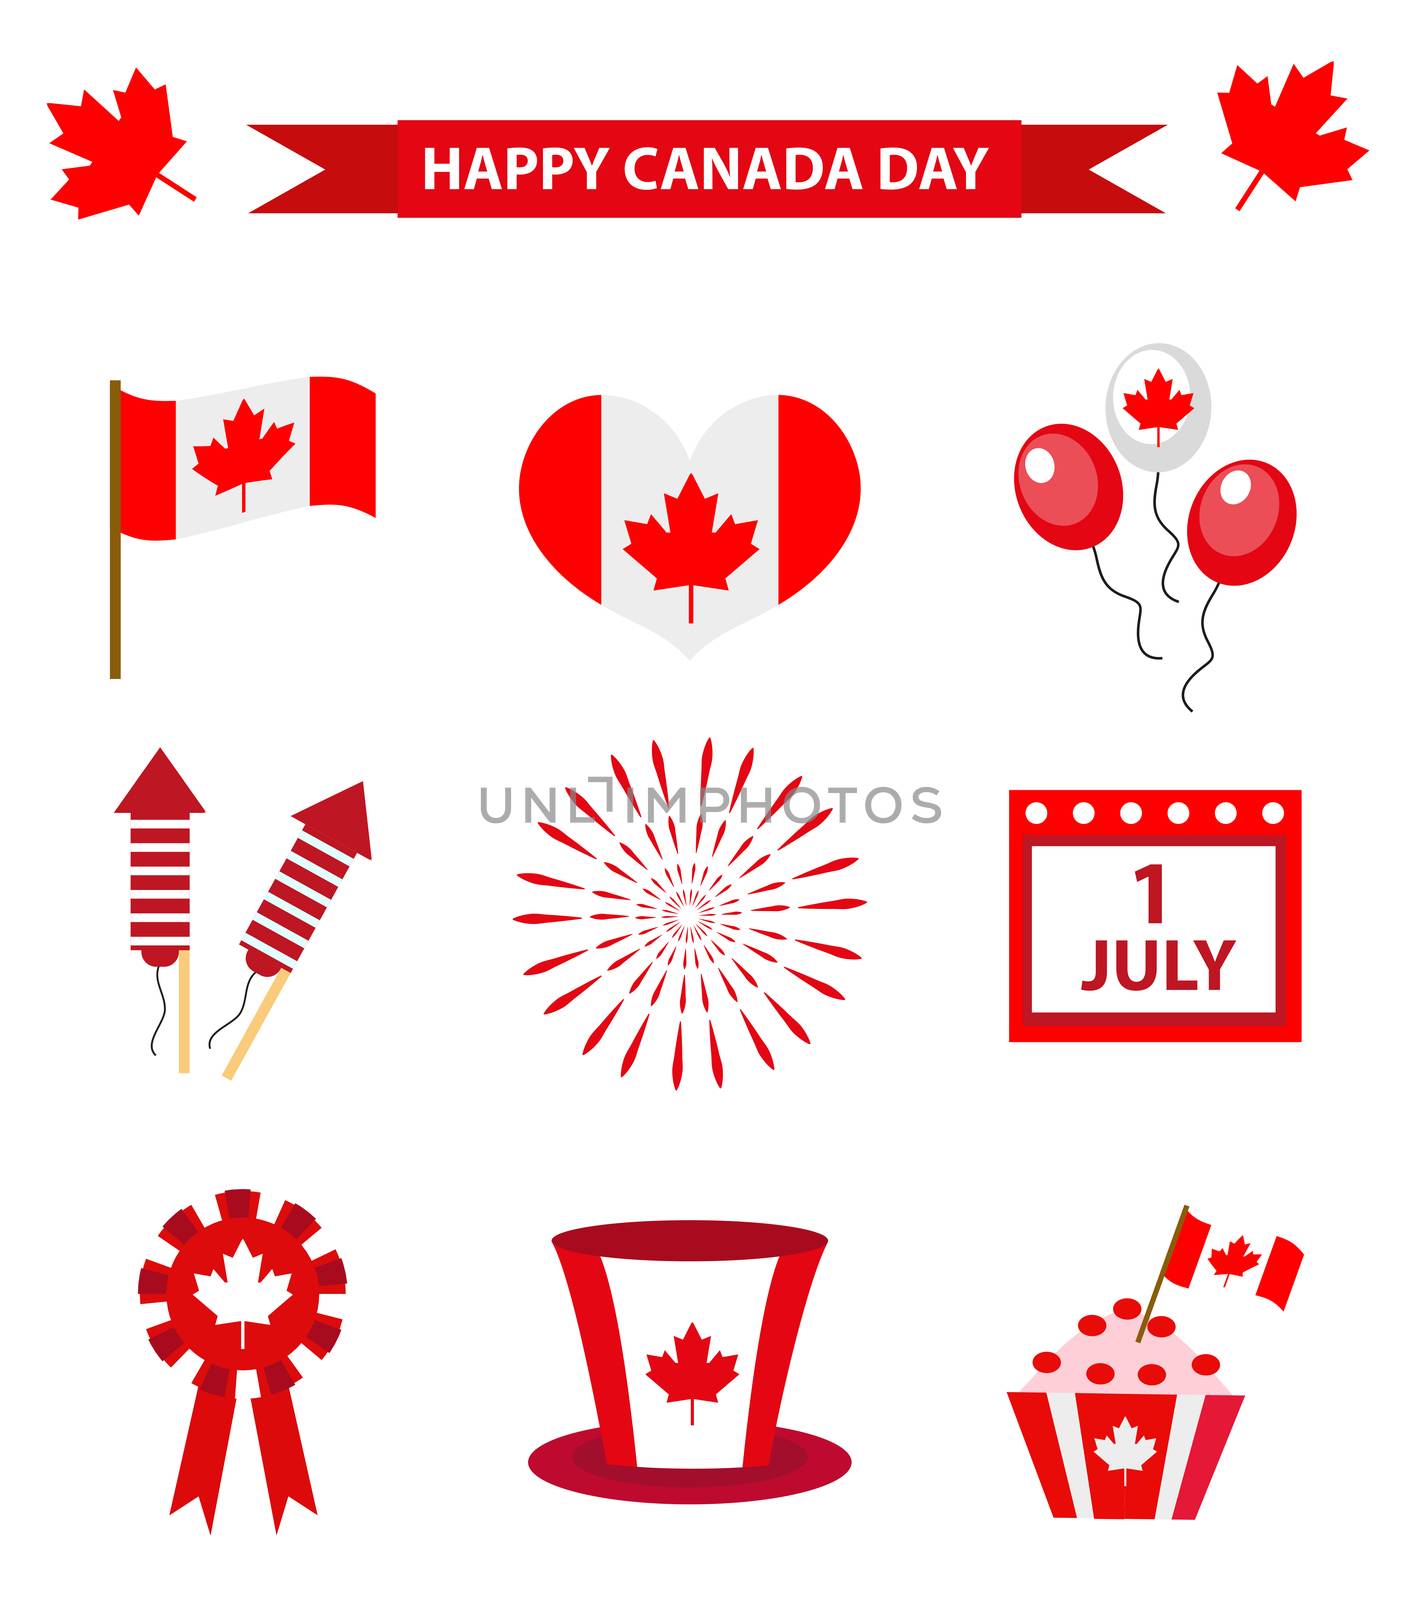 Happy Canada Day icons set, design elements, flat style. July 1 National Day of Canada holiday collection of objects with firework, flag, hat, balloons, emblem. illustration